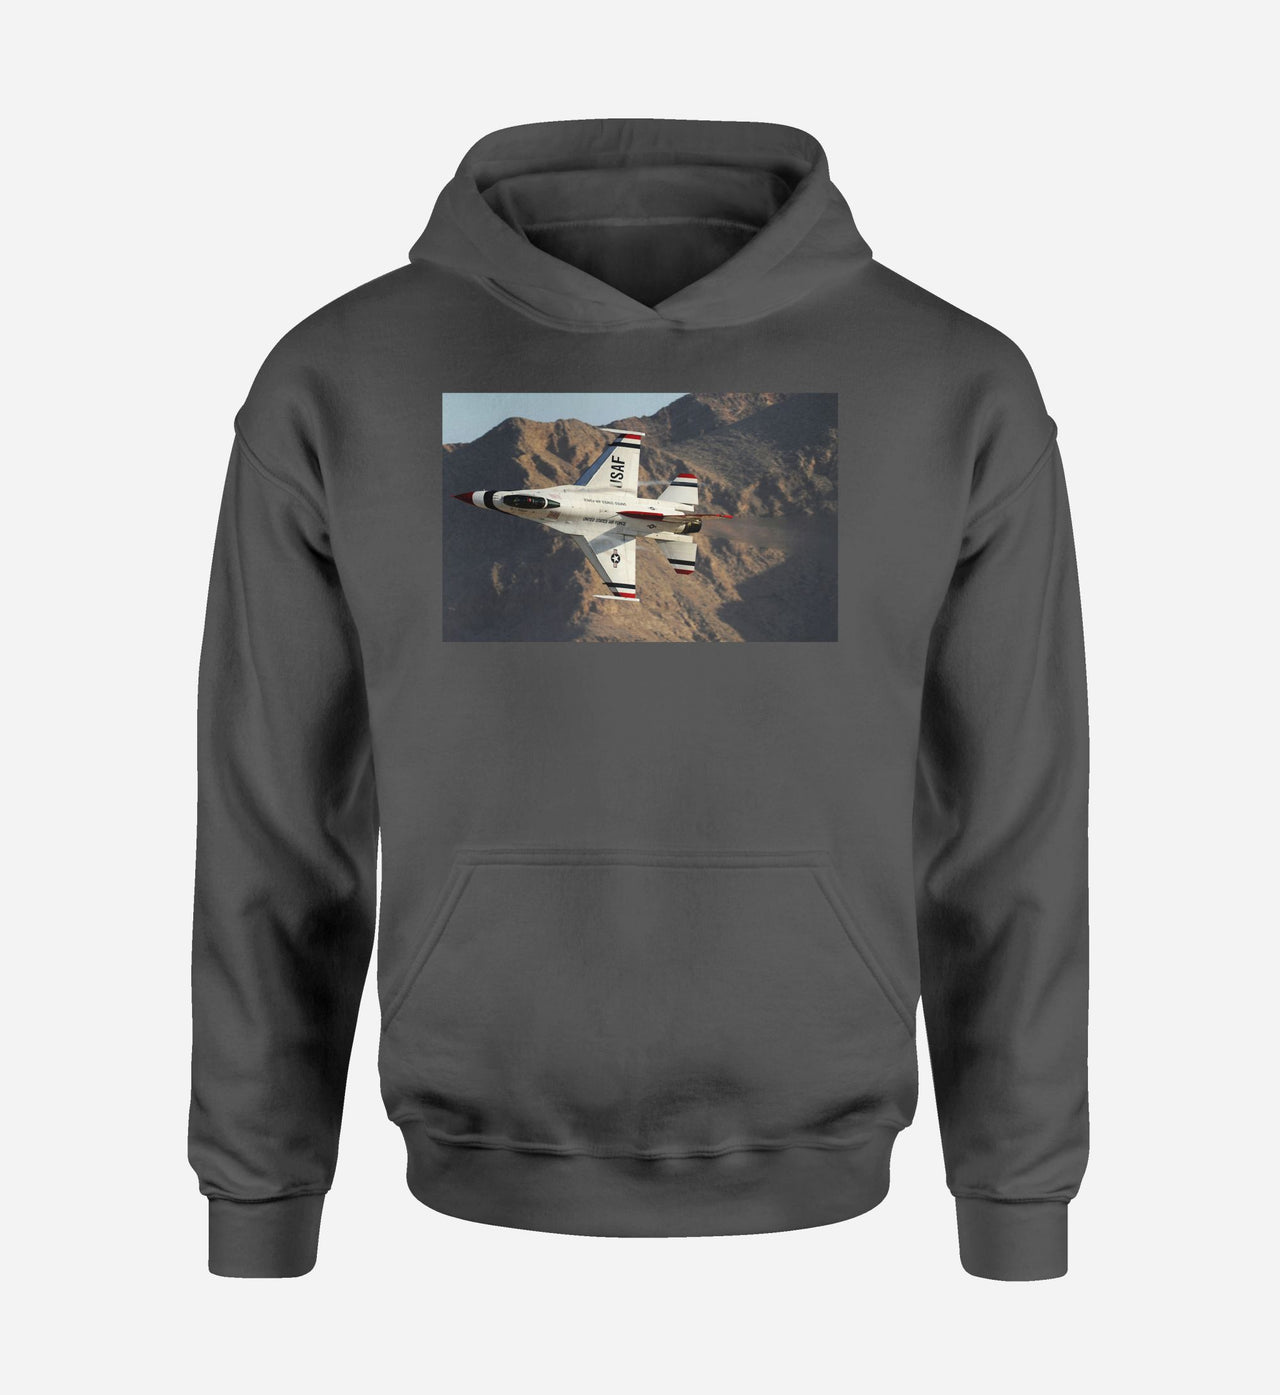 Amazing Show by Fighting Falcon F16 Designed Hoodies